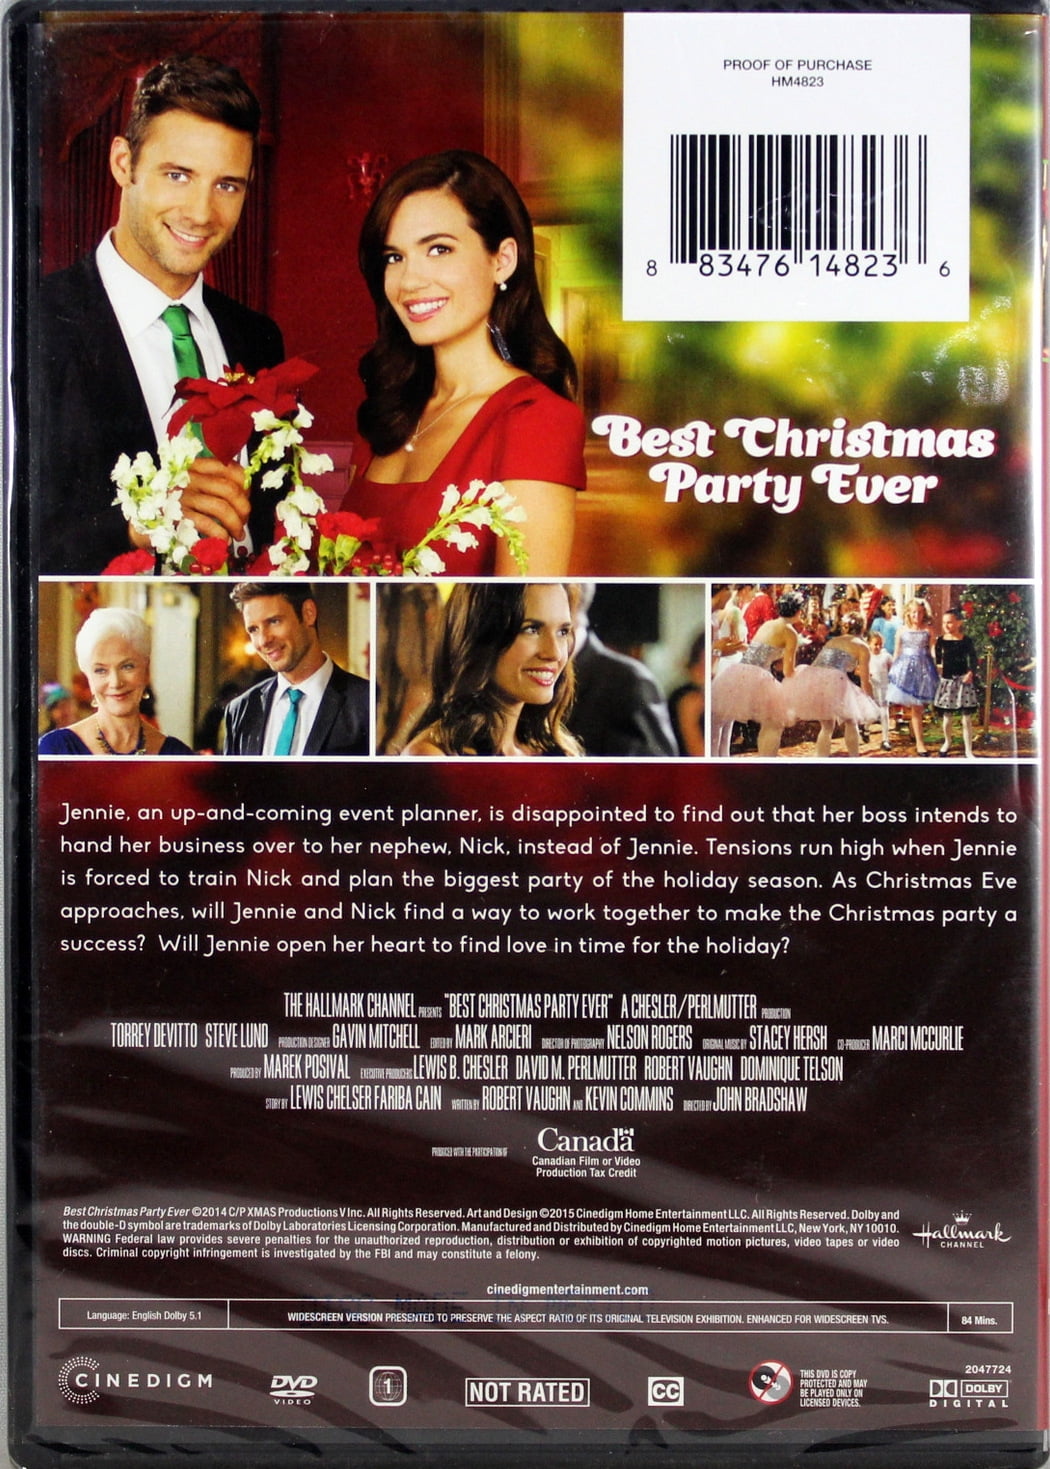 Best Christmas Party Ever (DVD)